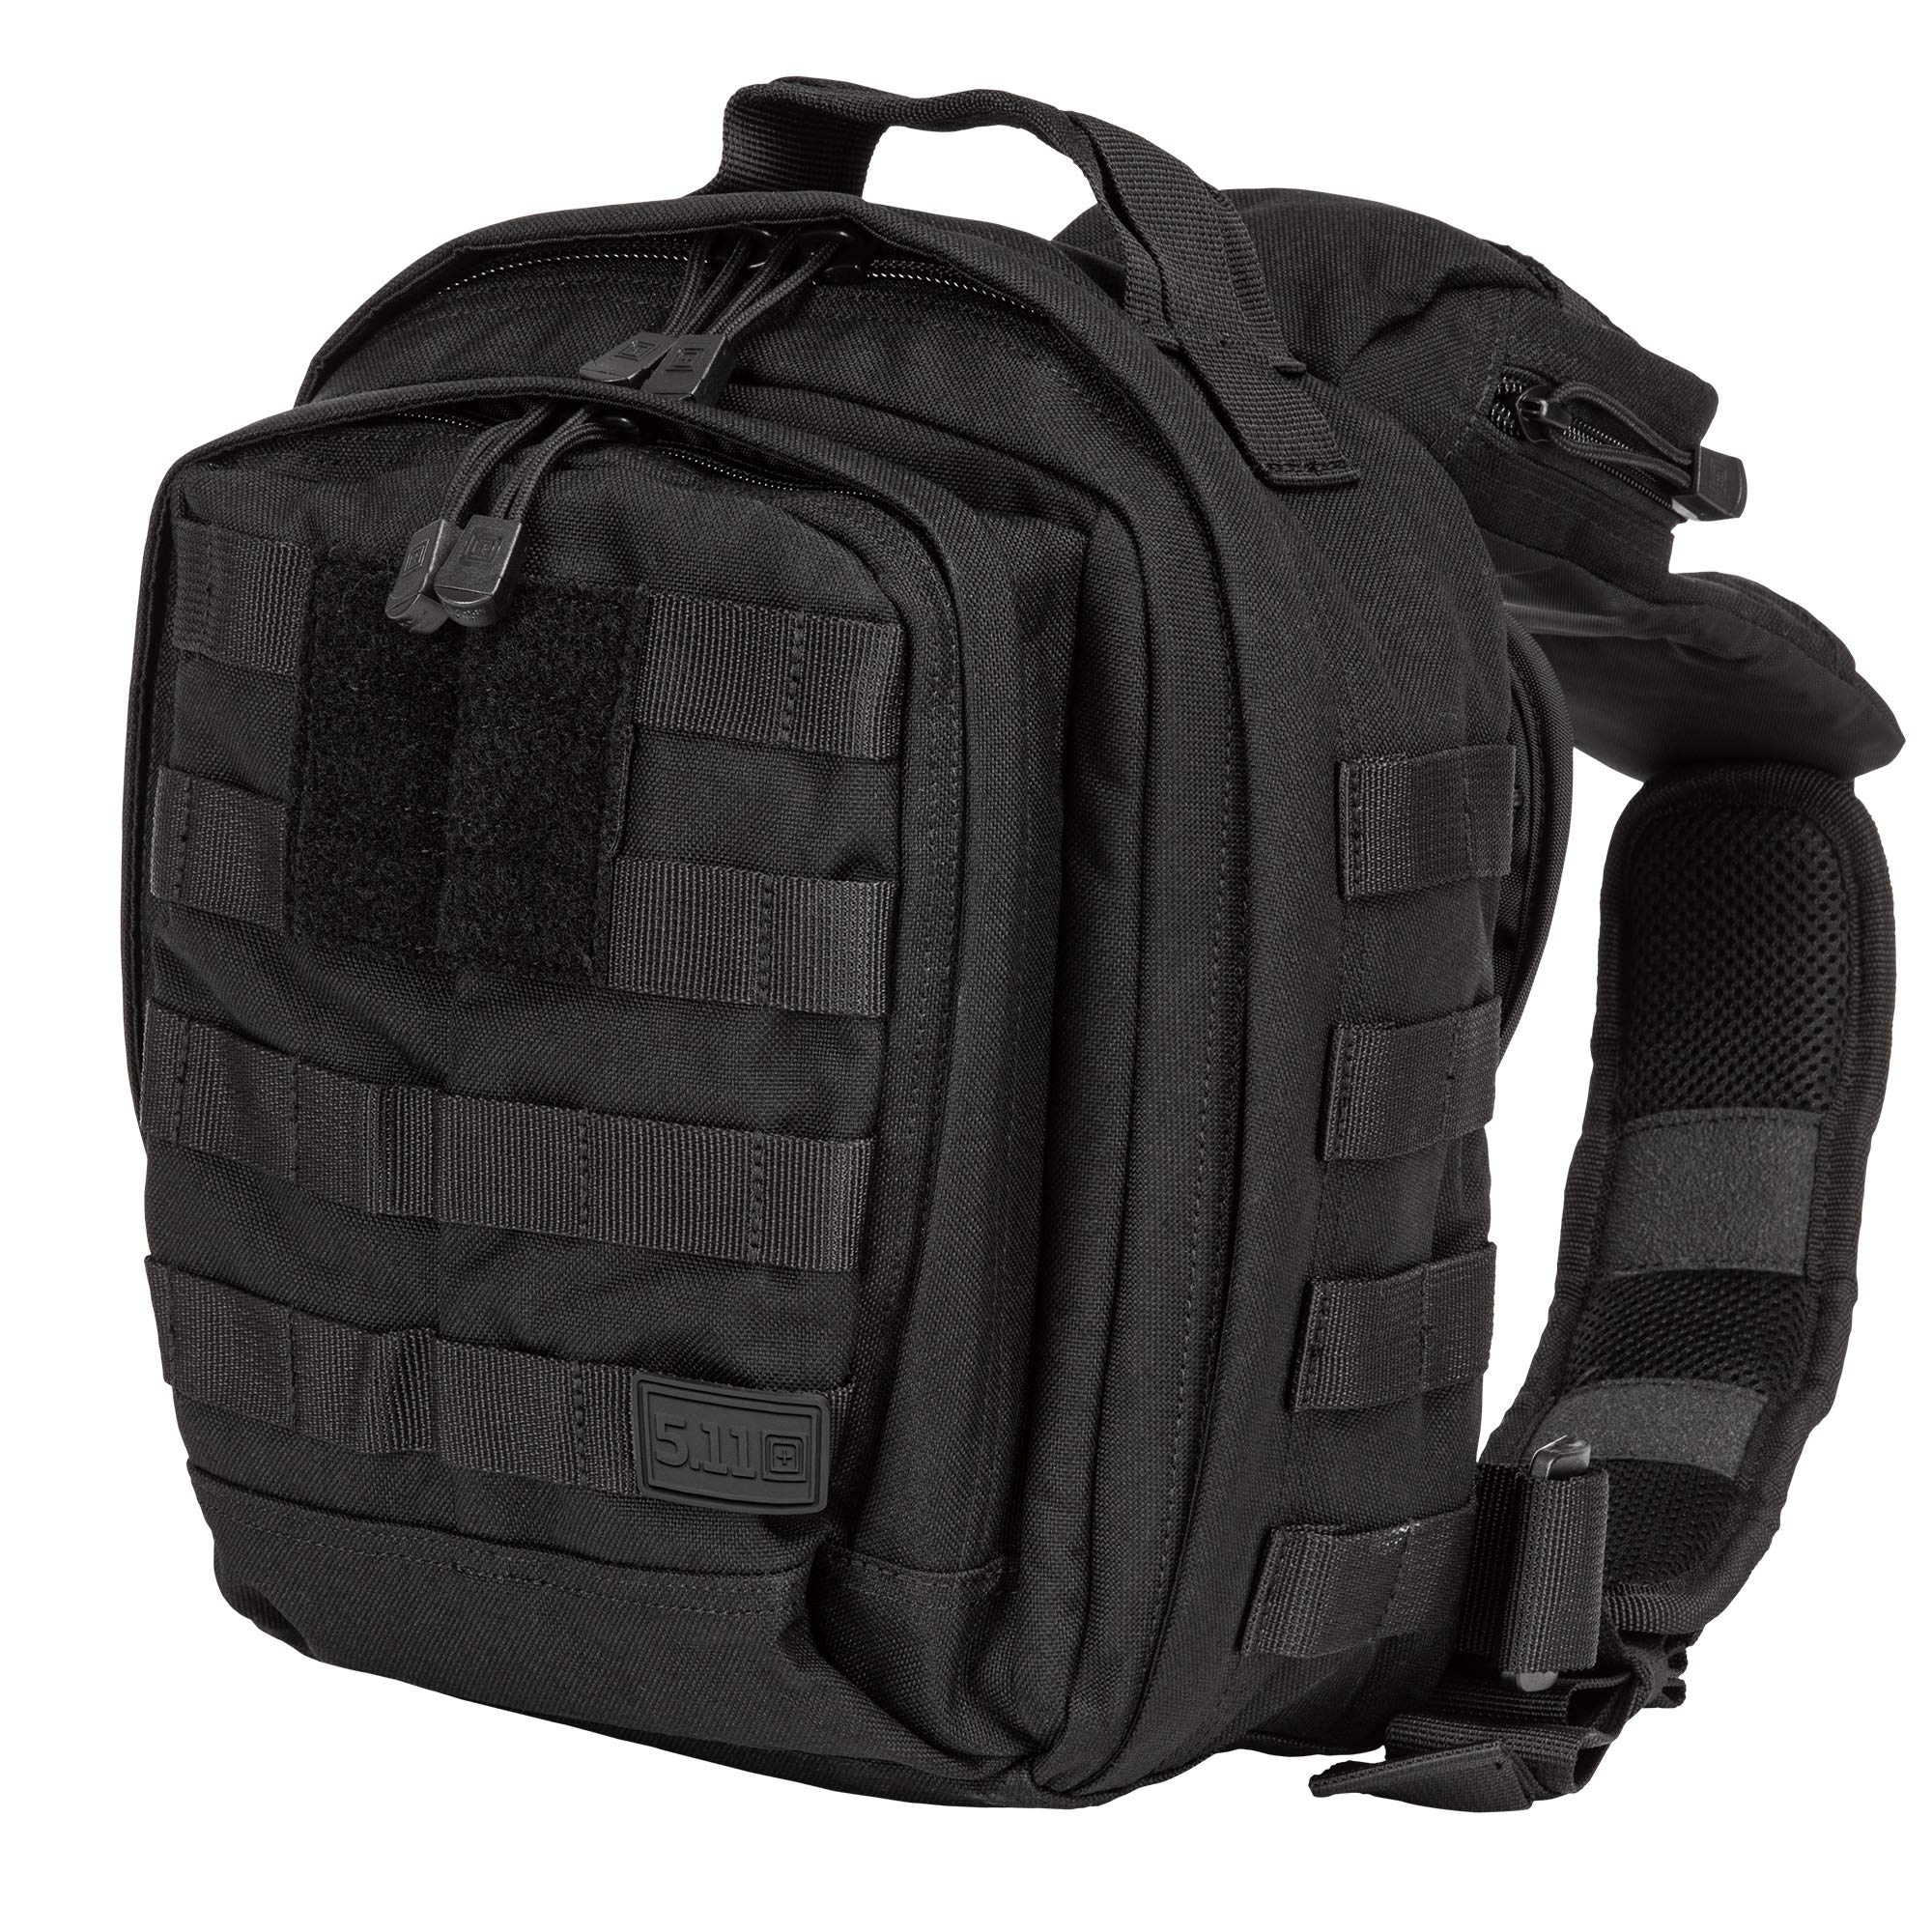 5.11 Tactical Molly Bags for Men